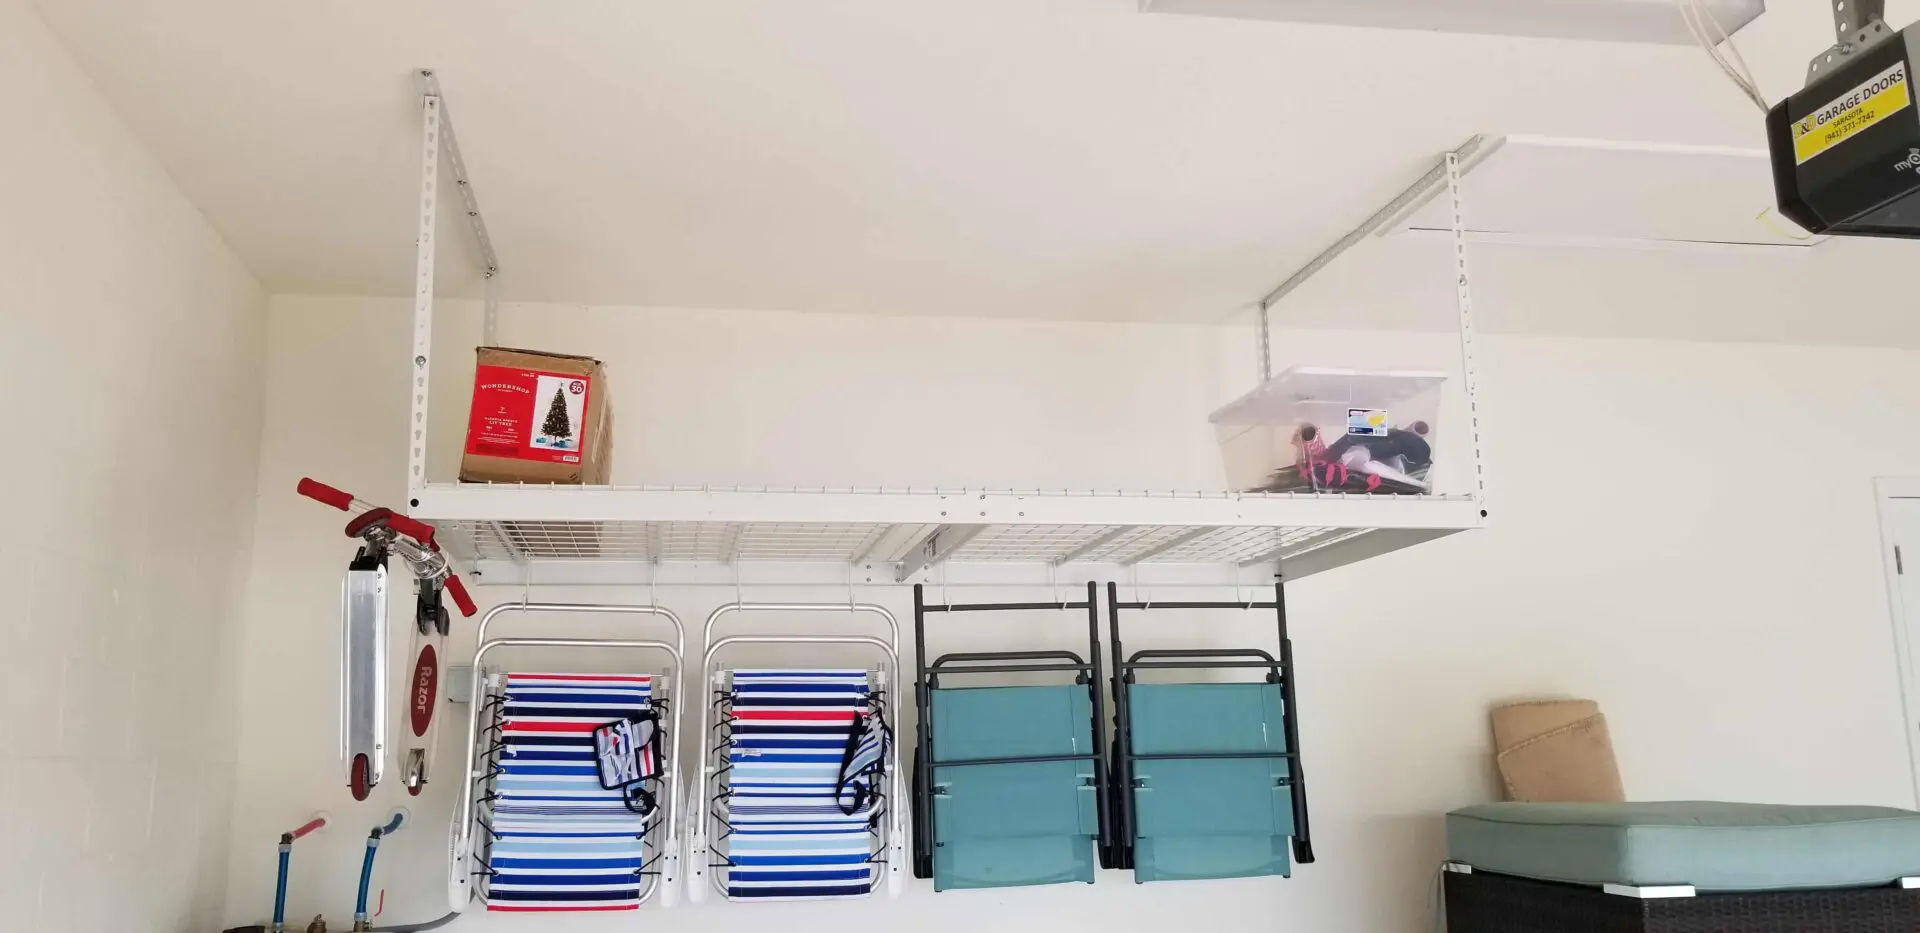 An overhead rack with two containers and four foldable chairs on its hooks